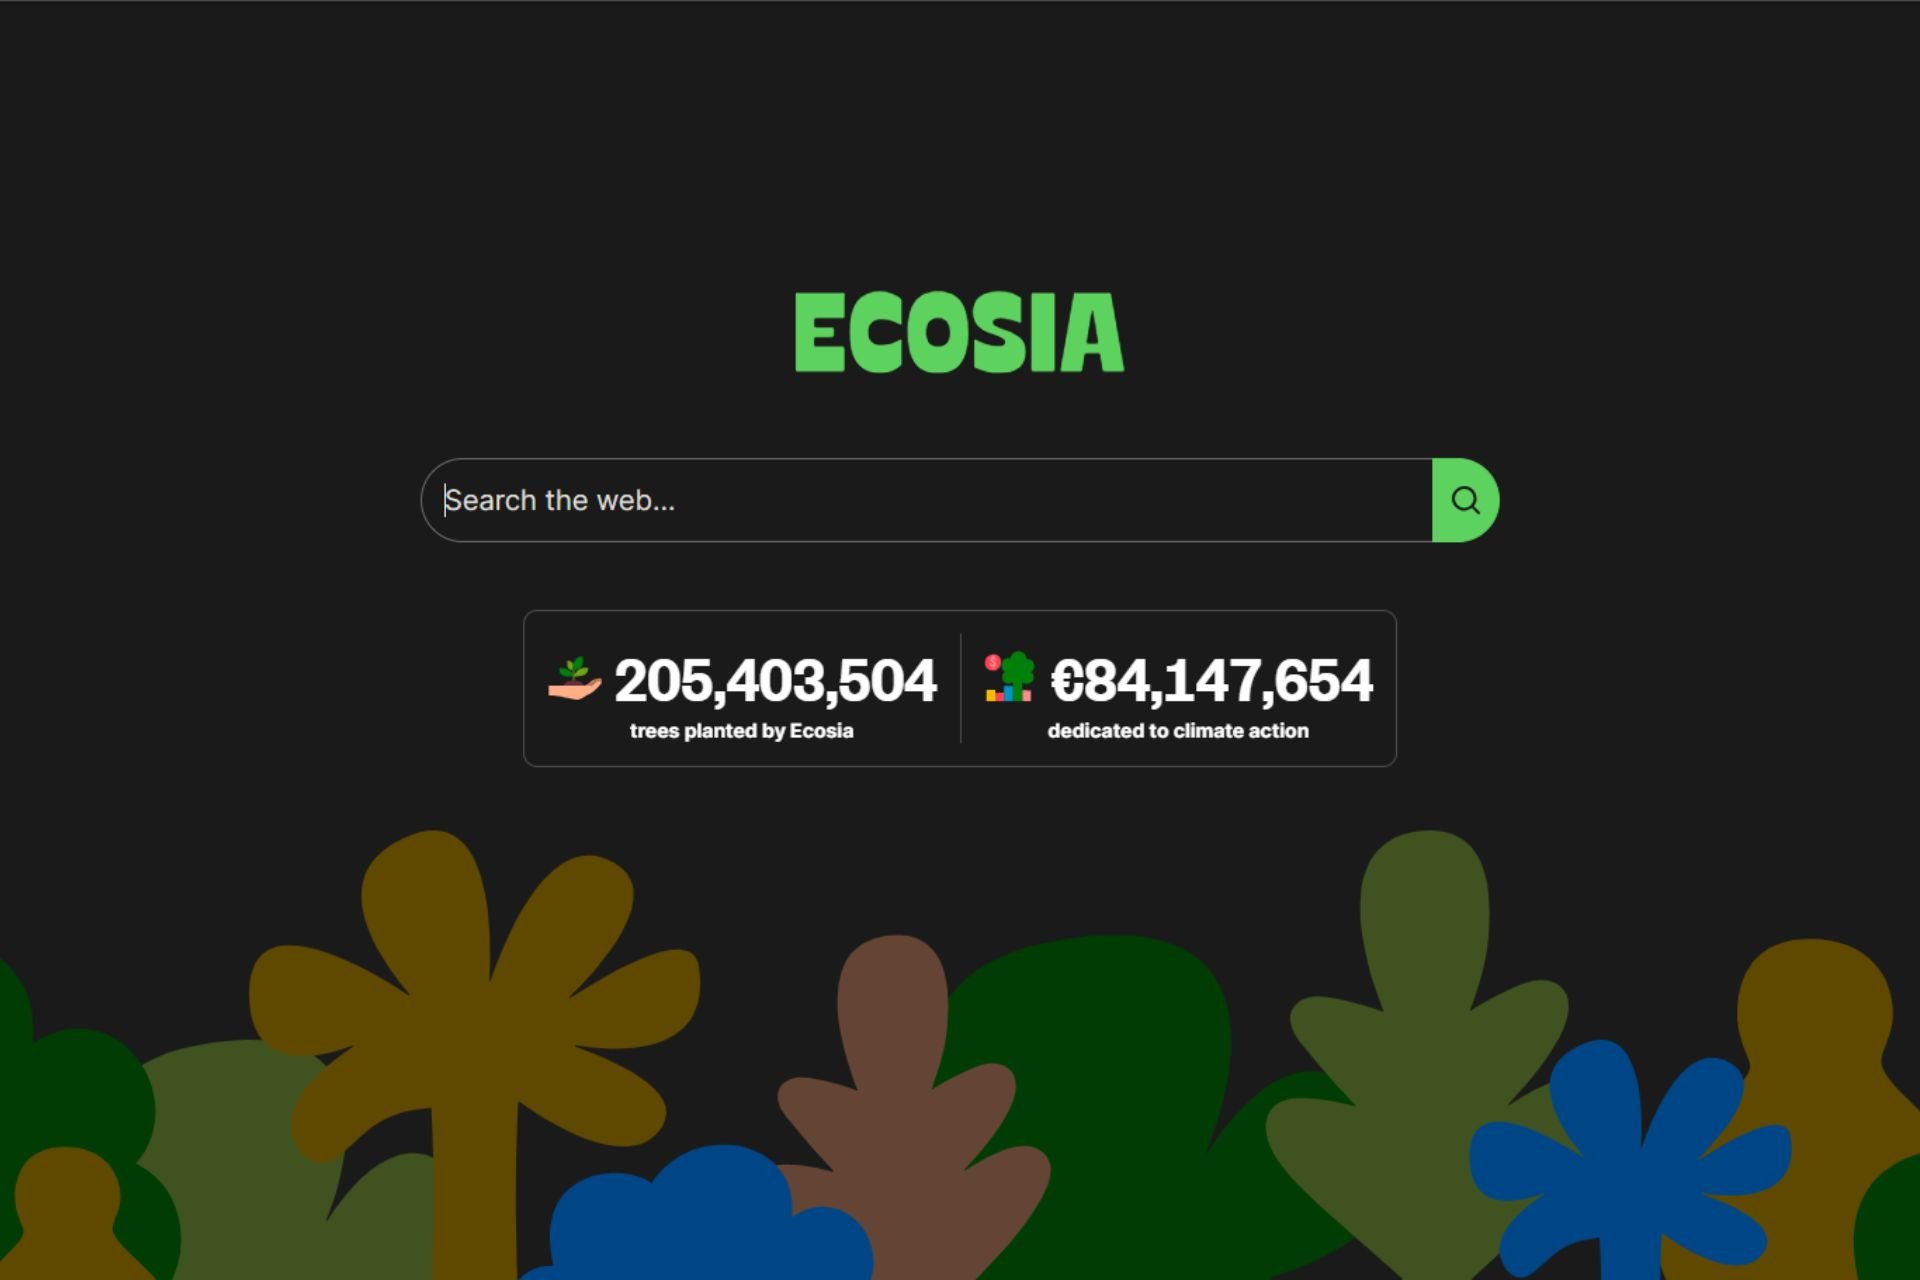 Meet Ecosia: the world’s greenest Internet browser, now available on Windows devices